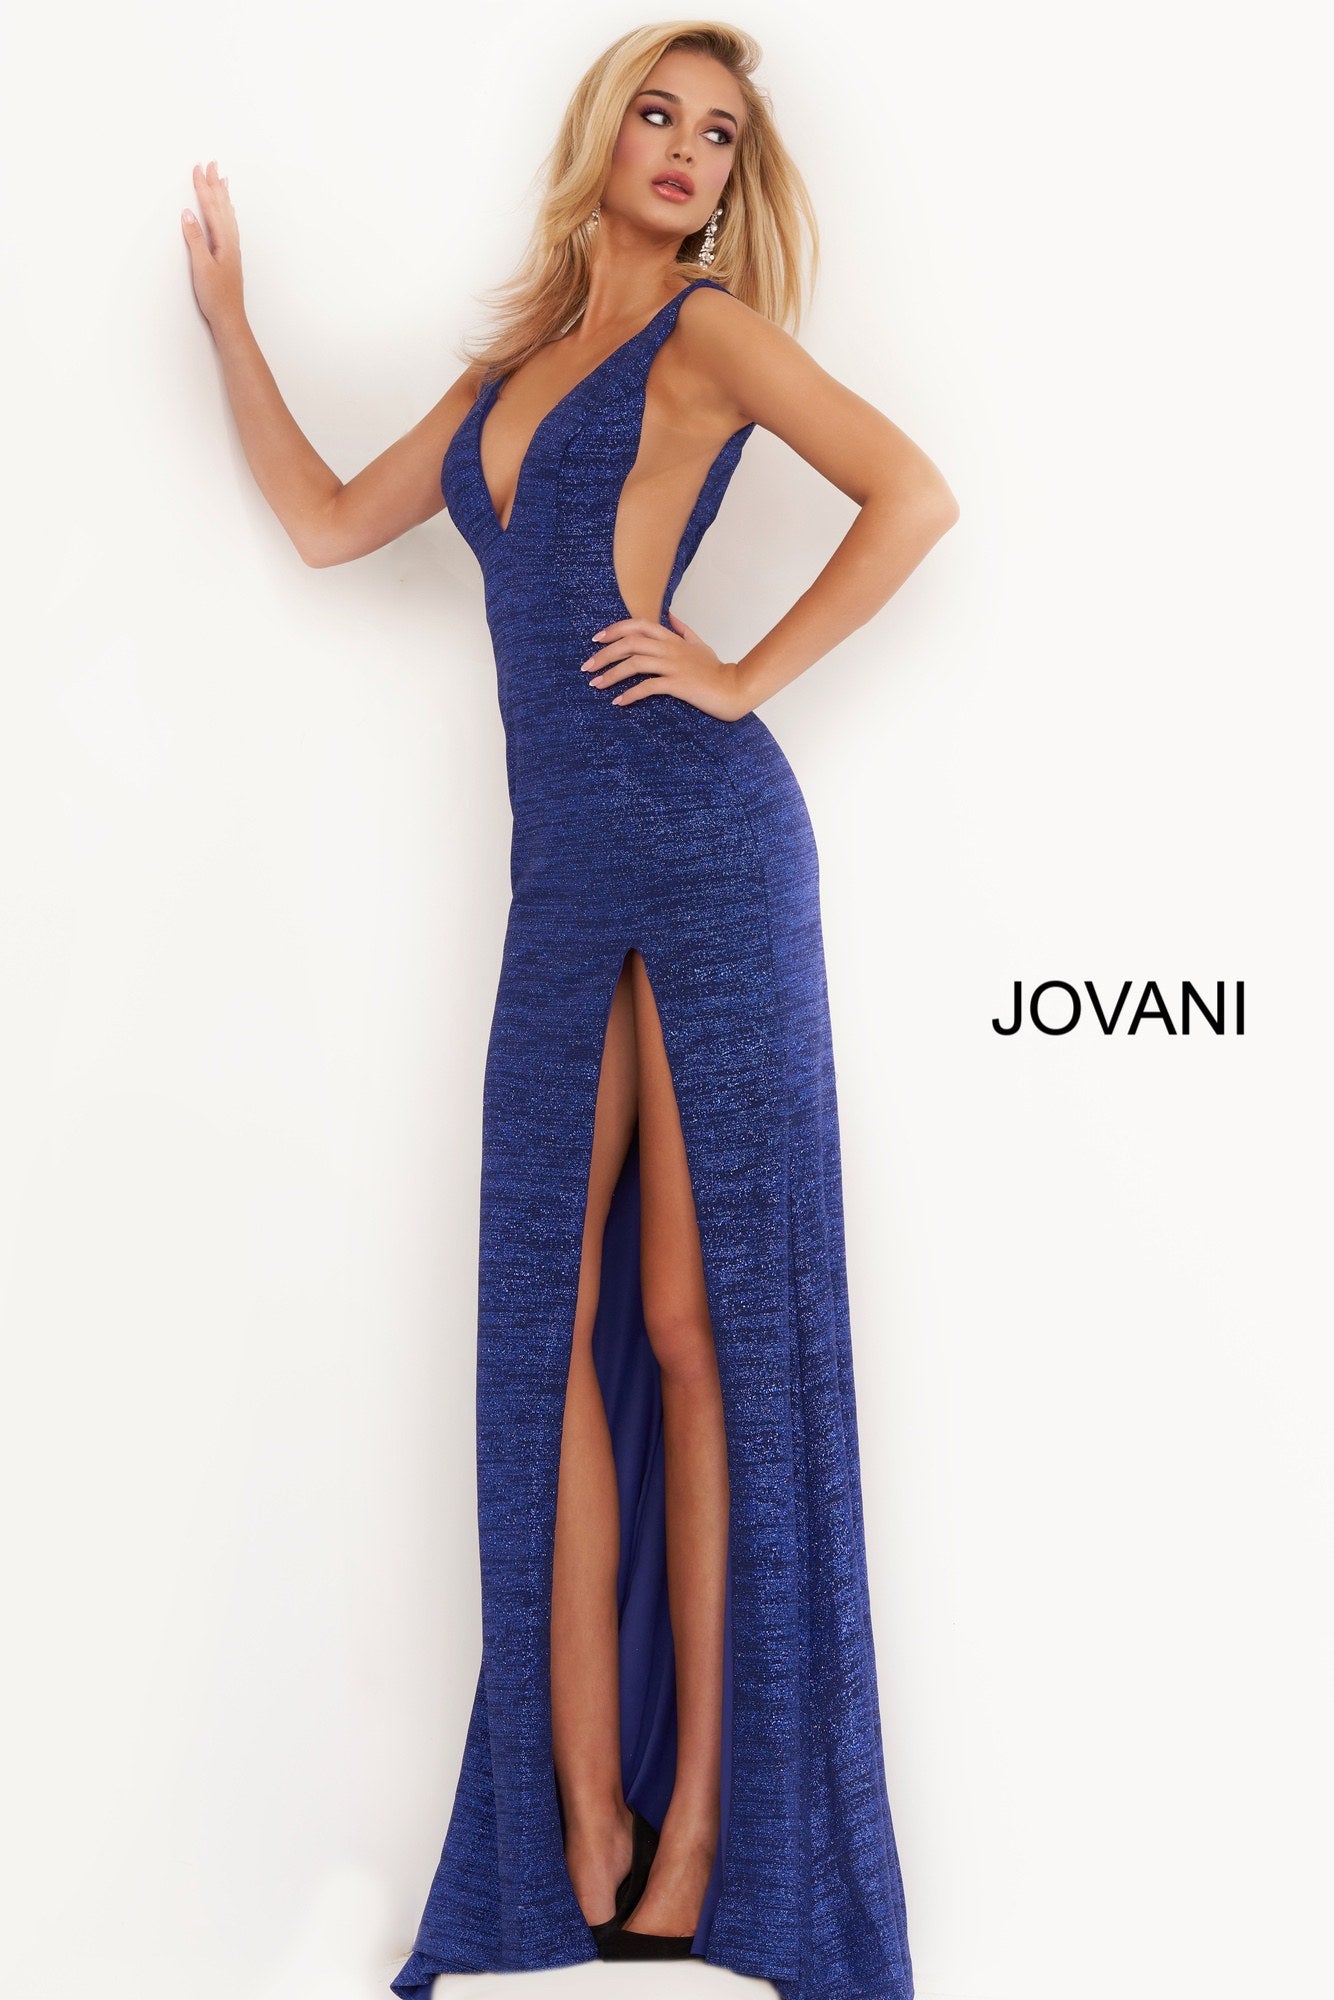 Jovani 02472 is a long Fitted Prom, Pageant & Formal Evening dress. Featuring a Stretch Glitter jersey material for a touch of shimmer. V Neckline and open v back. sheer side cutout panels. slit in the skirt and small sweeping train.  Available Colors: black/gold, black/multi, gunmetal, hot-pink, jade, red, royal, soft blue/silver  Available Sizes: 00,0,2,4,6,8,10,12,14,16,18,20,22,24